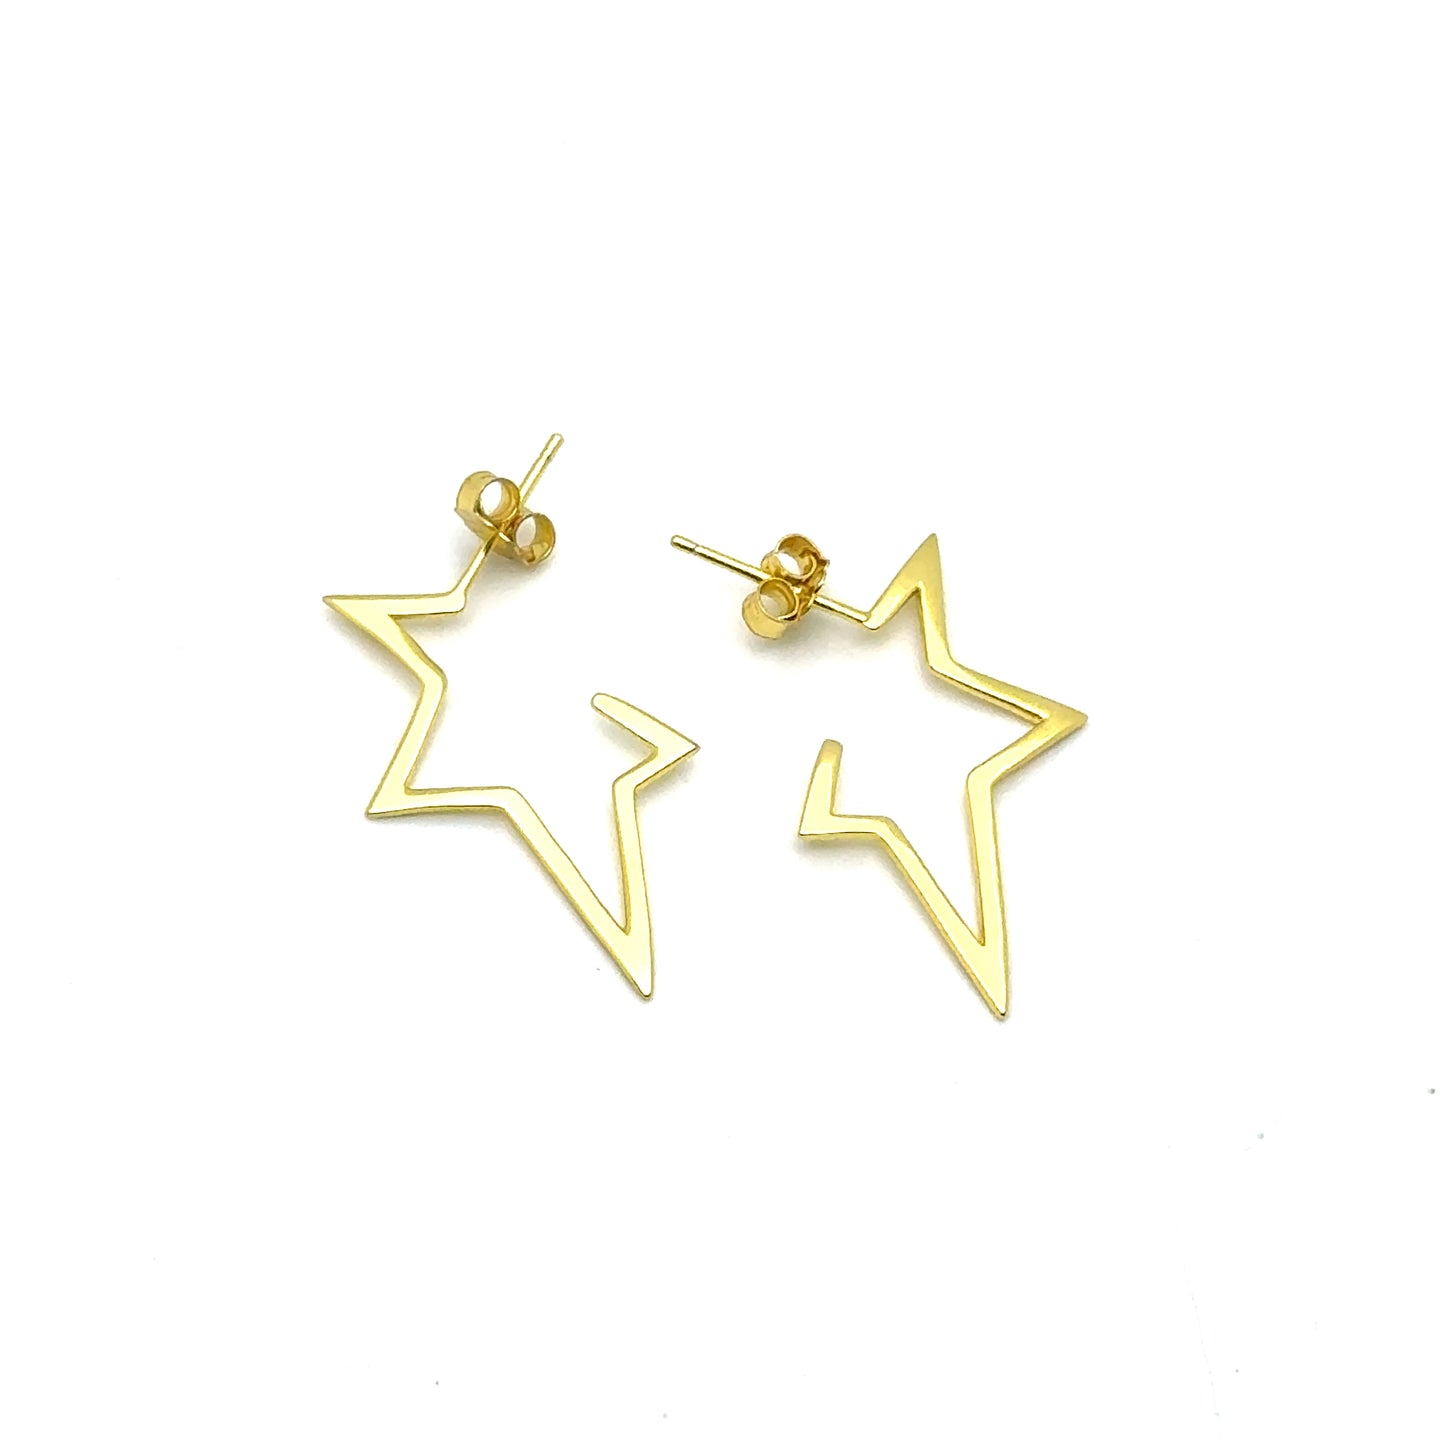 Star Profile Post Earrings in Sterling Silver or 18k Gold Over Silver